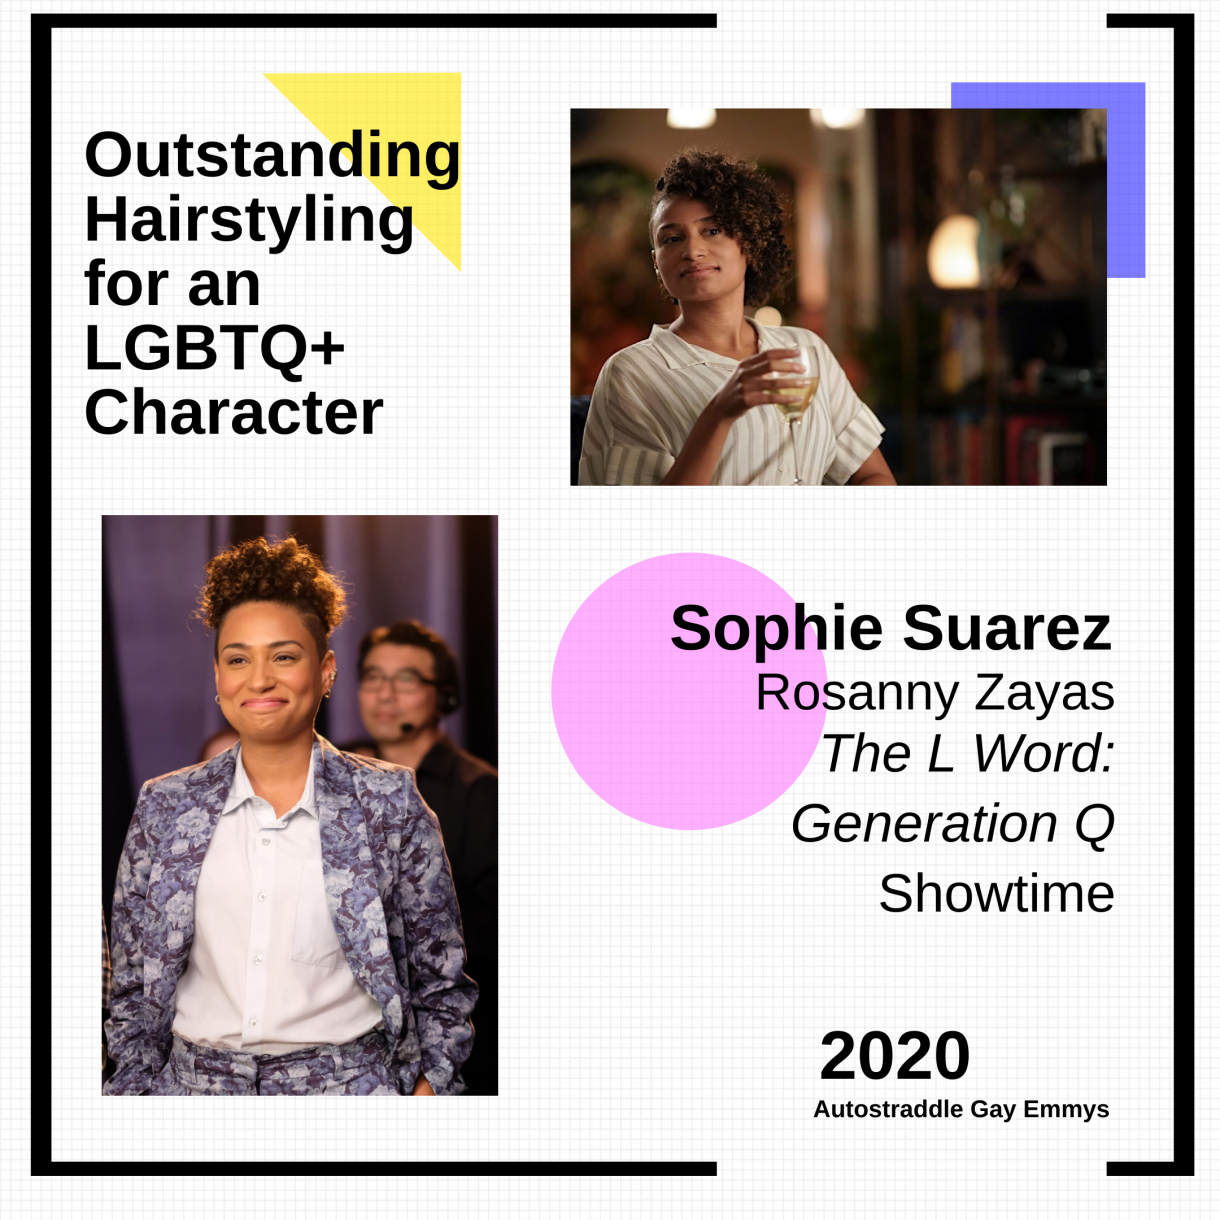 Outstanding Hairstyling for an LGBTQ+ Character: Sophie Suarez “The L Word: Generation Q”." Two pictures of Sophie with her hair looking cute. 